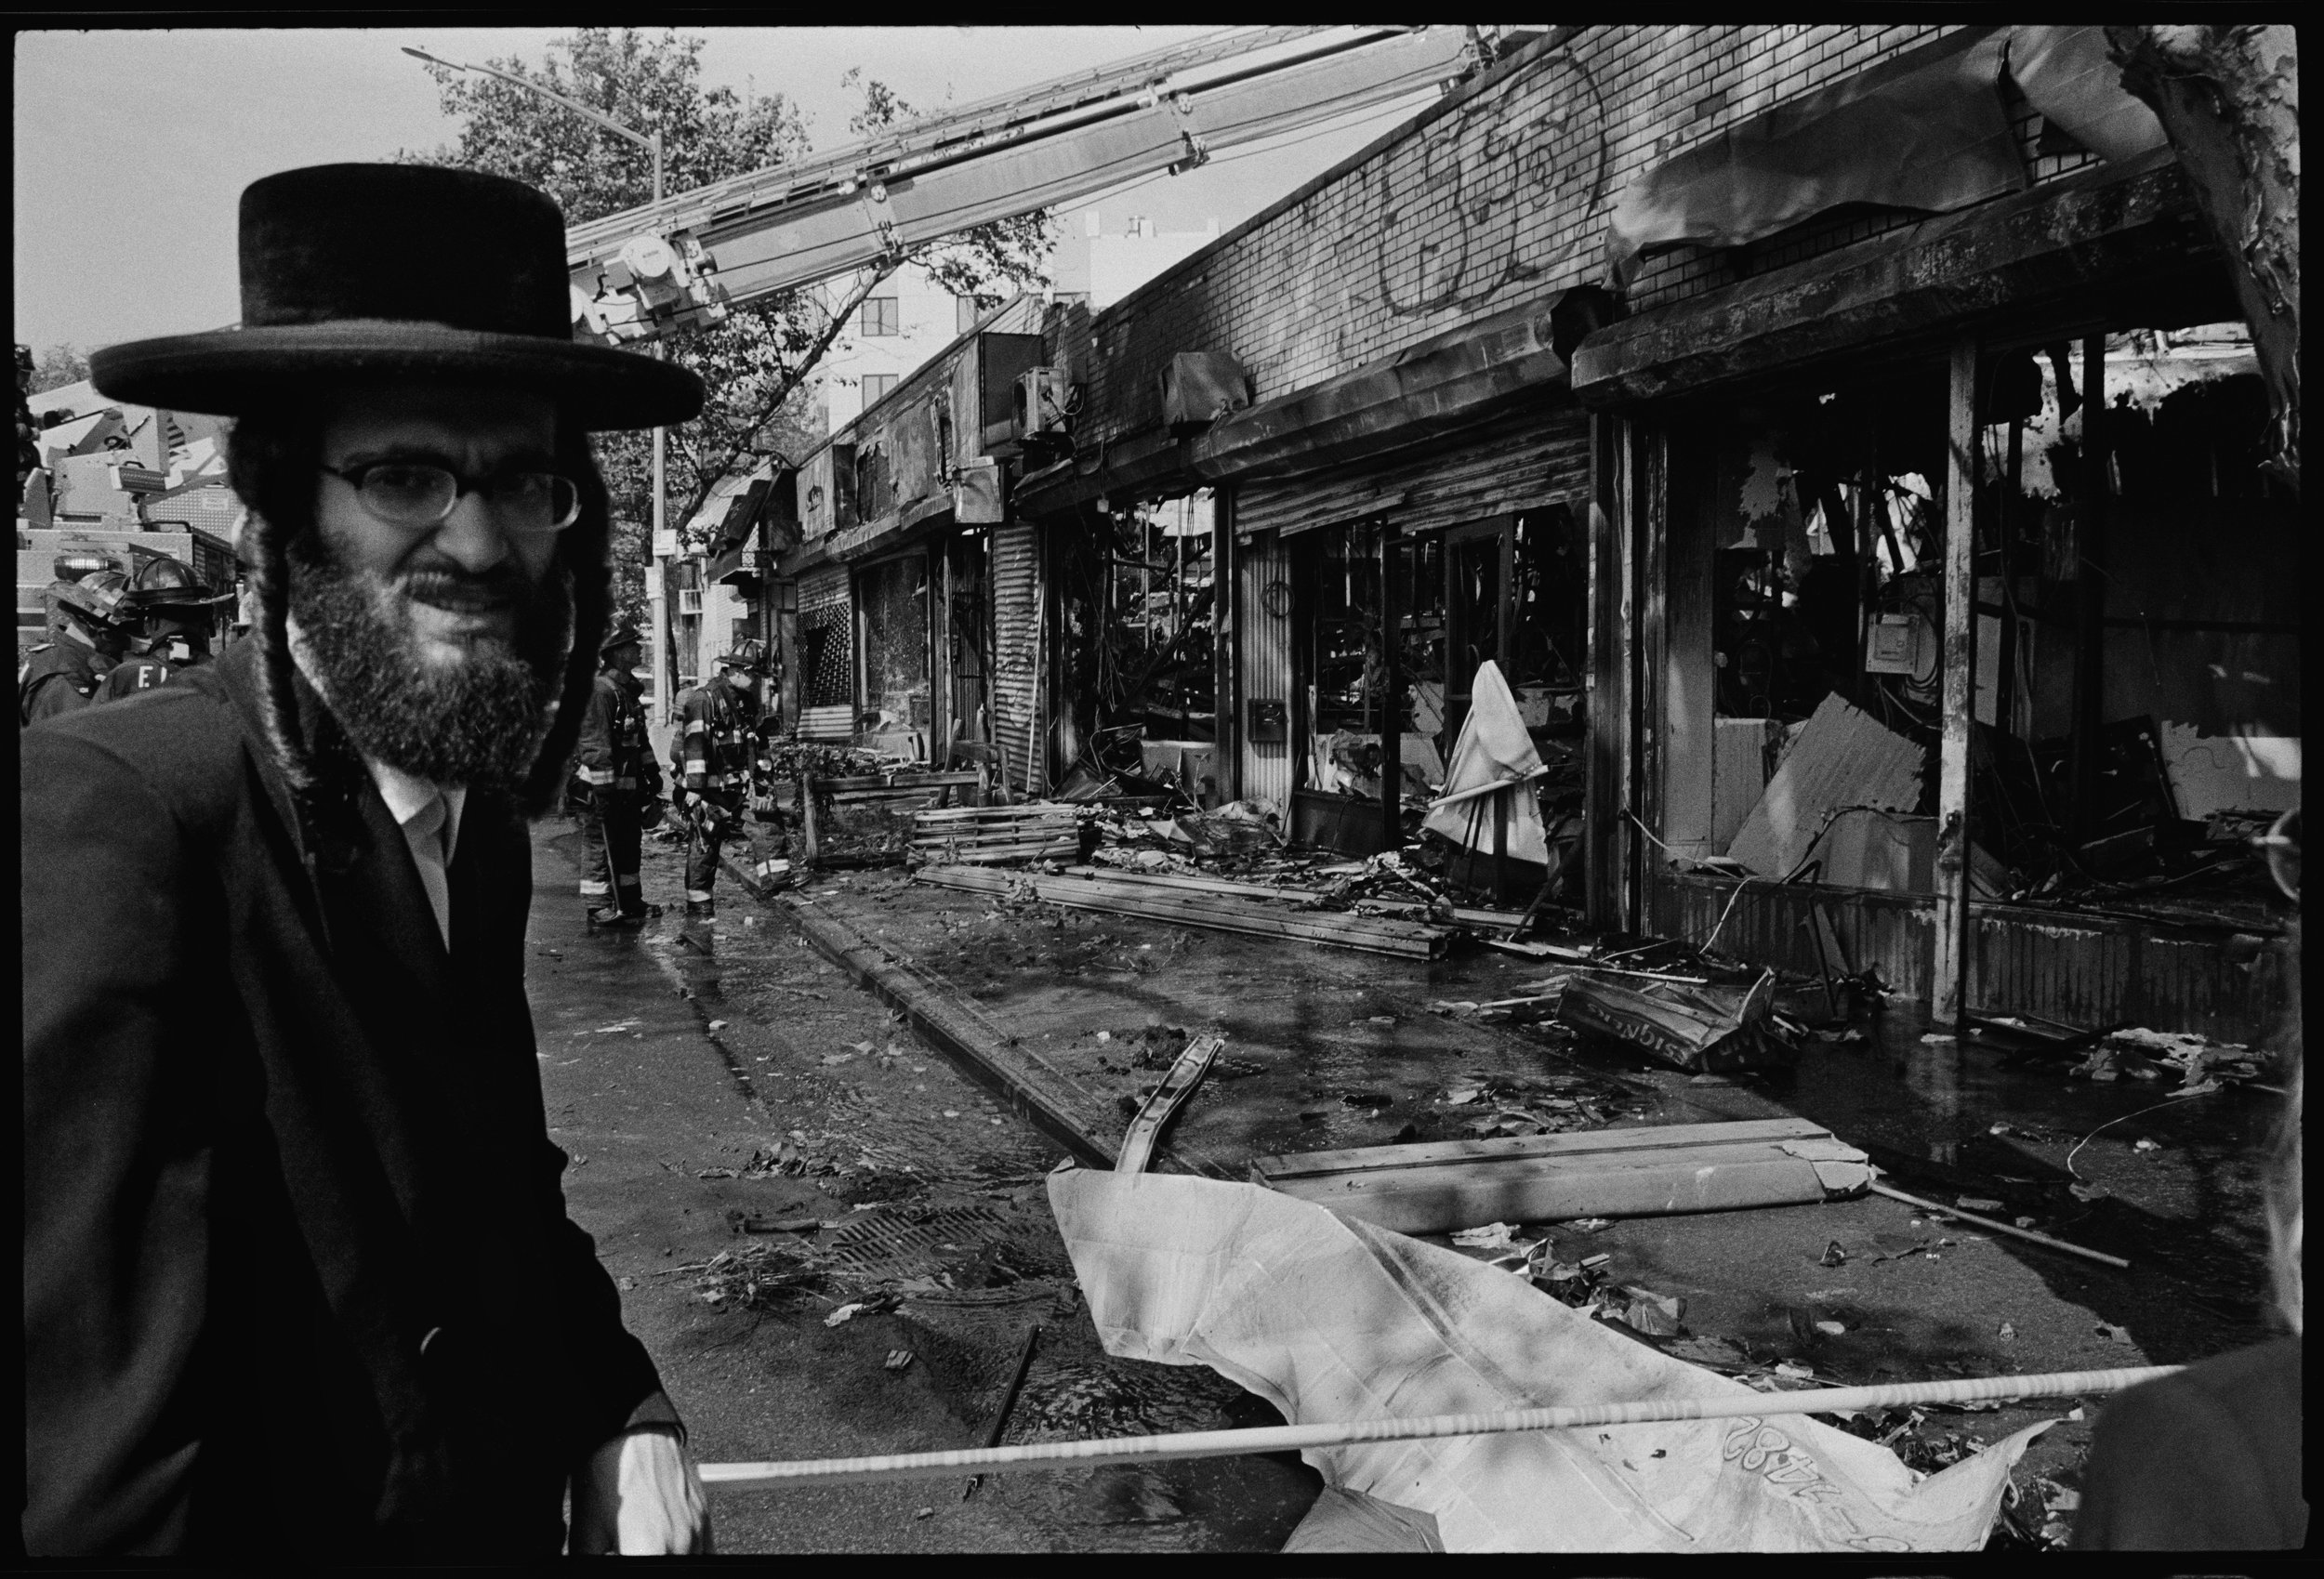 Man in front of burned storefronts, Williamsburg St E